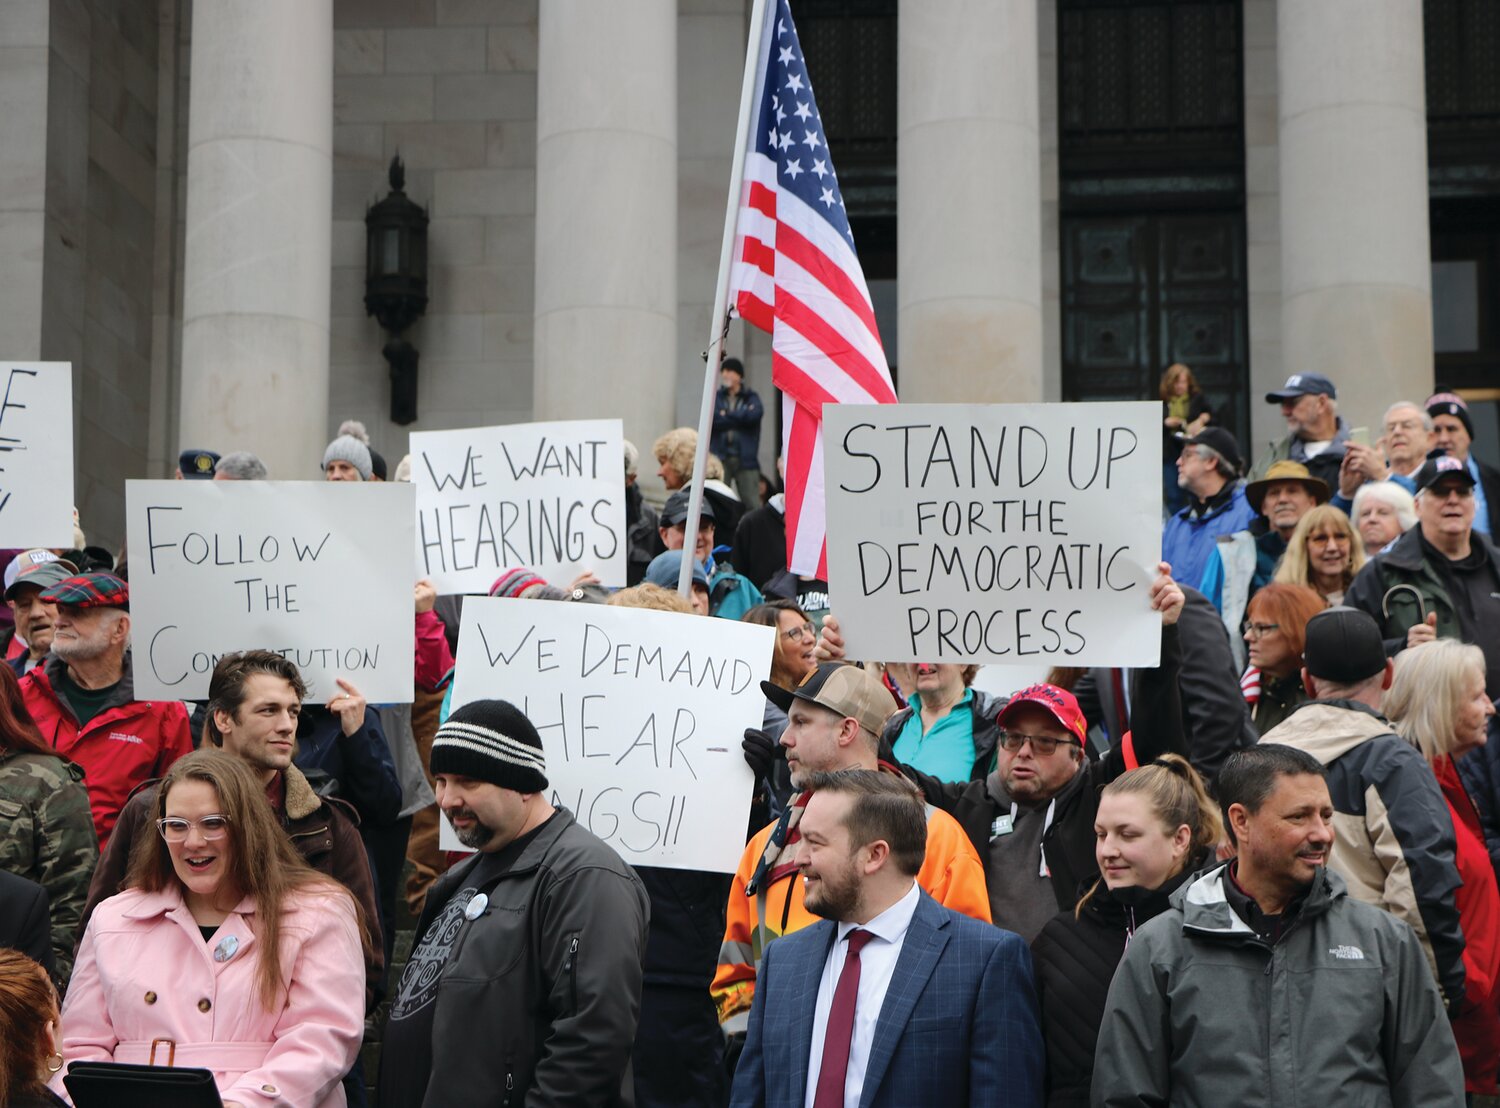 Washingtonians from all over the state gathered on the north steps at the capitol in Olympia, for a rally planned only a week in advance. Protesters displayed signs that read “We want hearings,” and “Follow the constitution.”